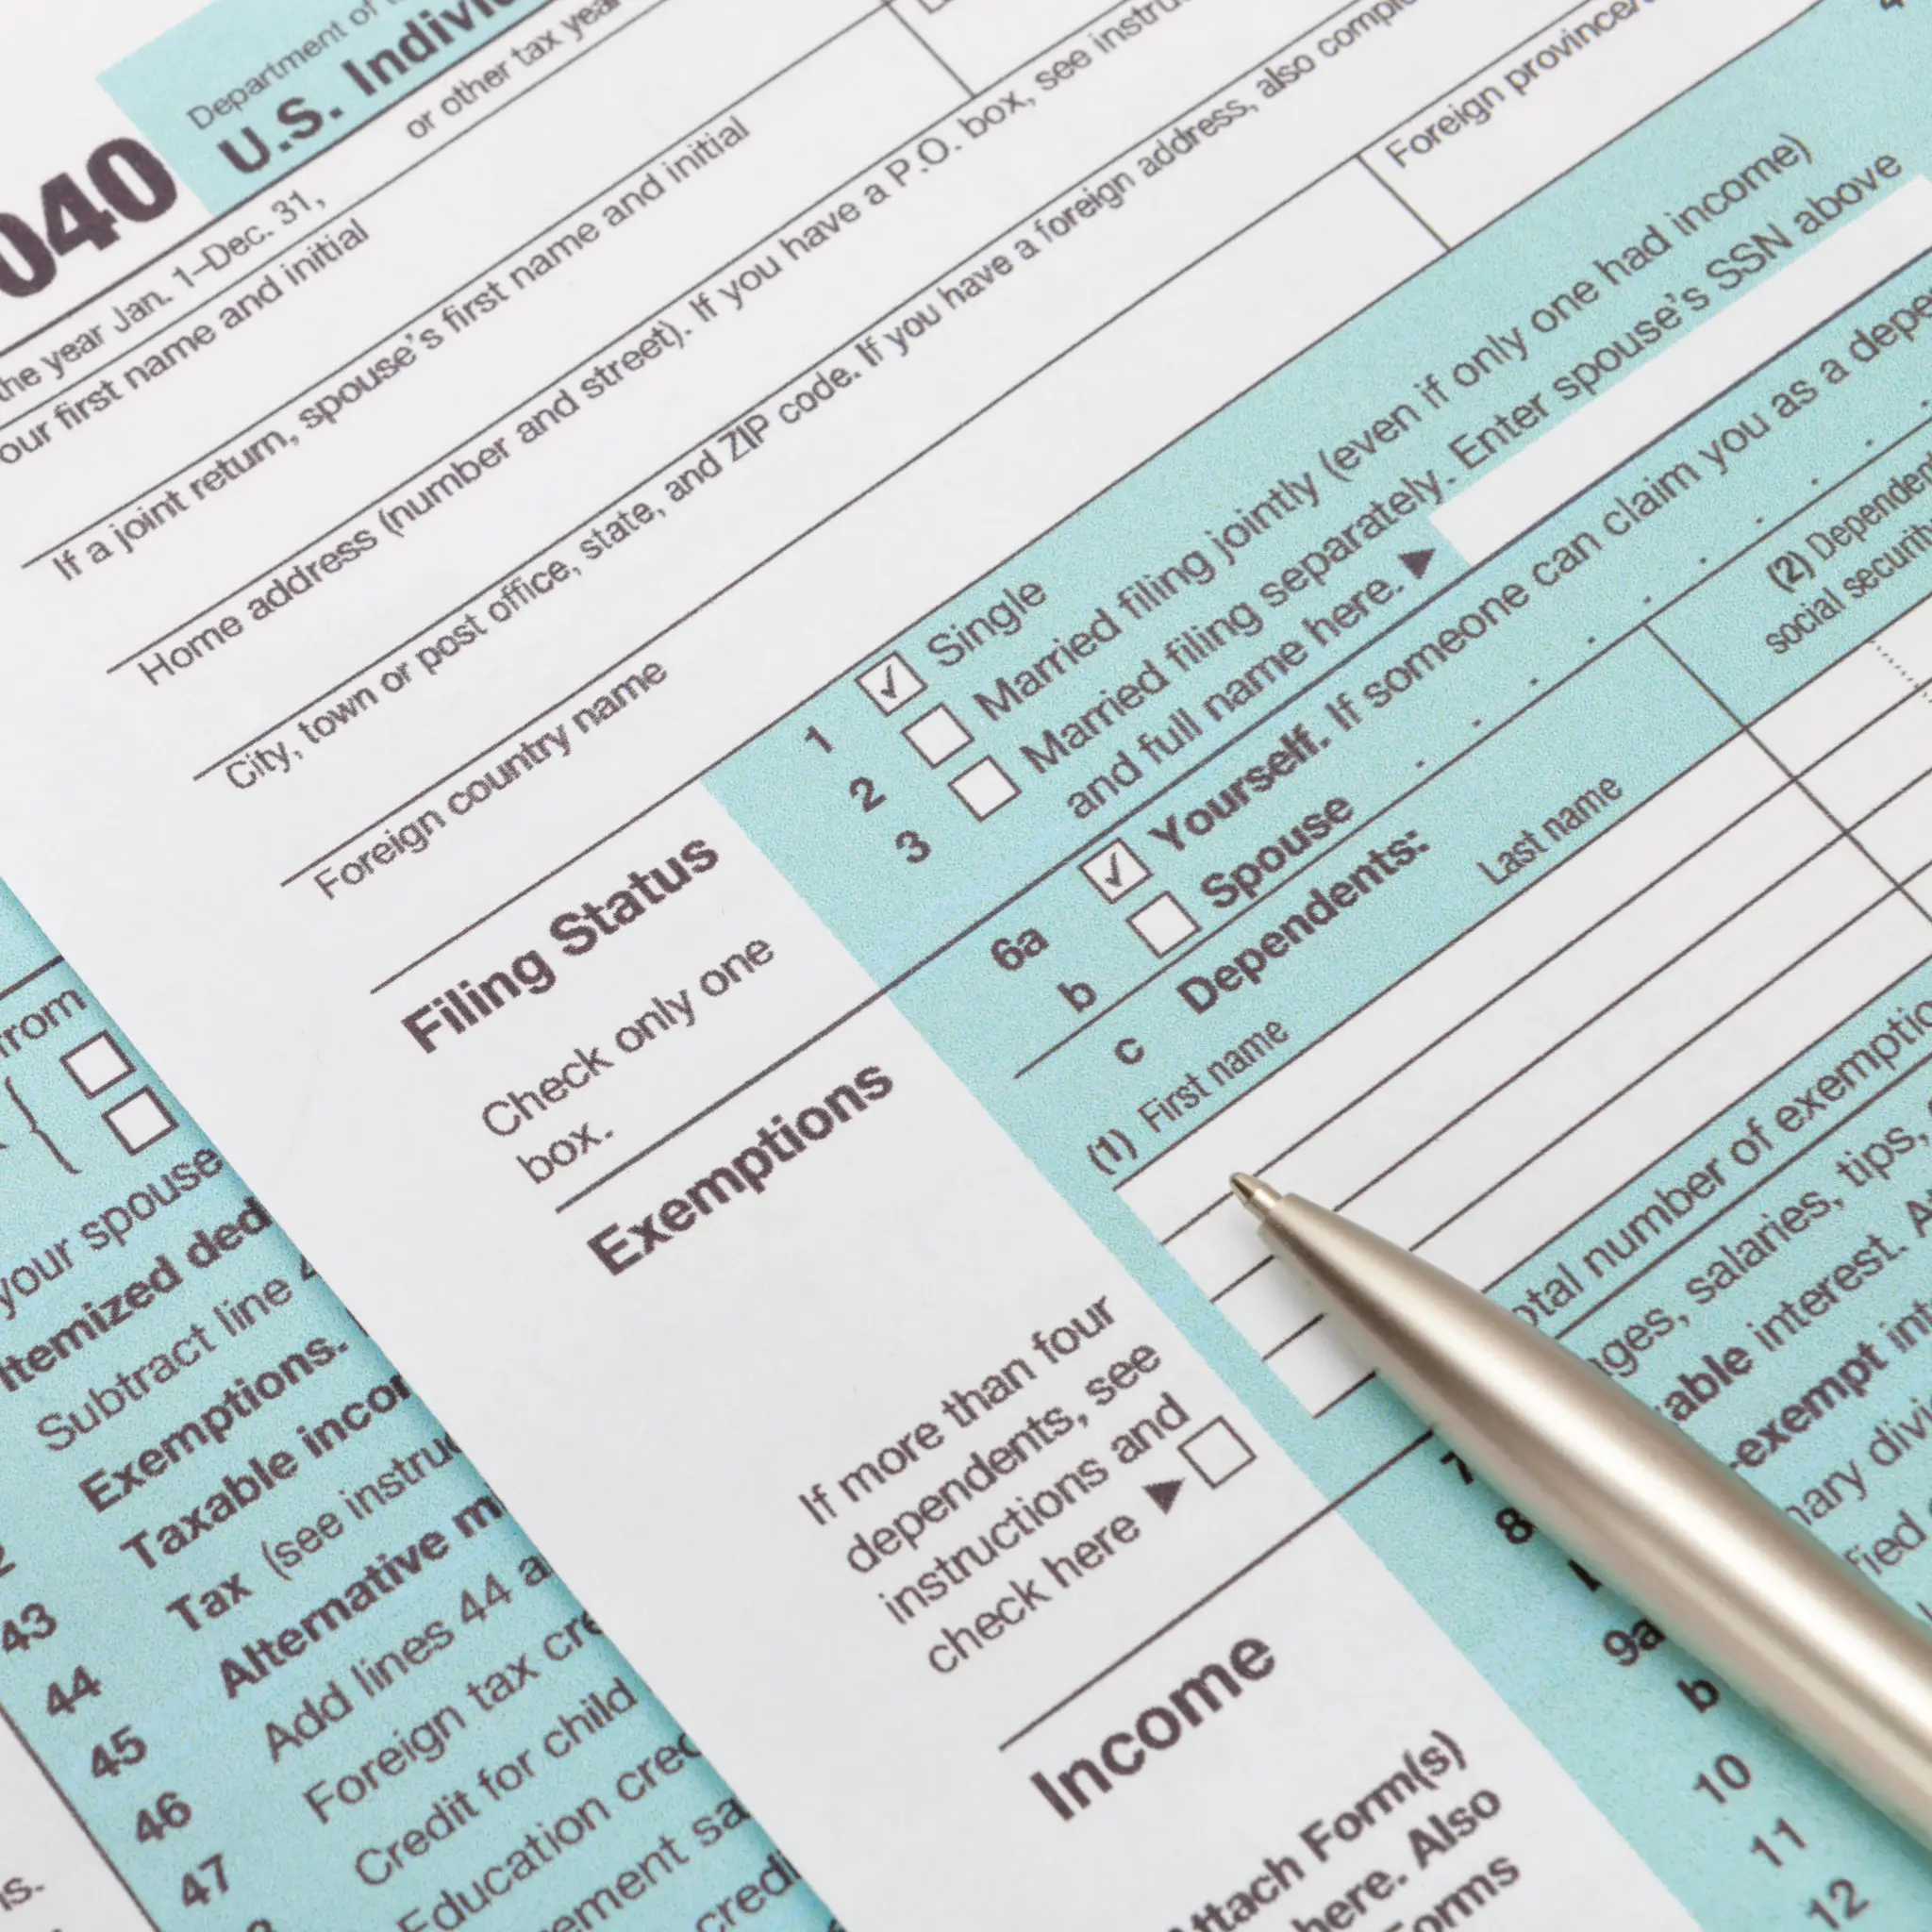 What to Know if You Lost Your Job Before Filing Your Taxes